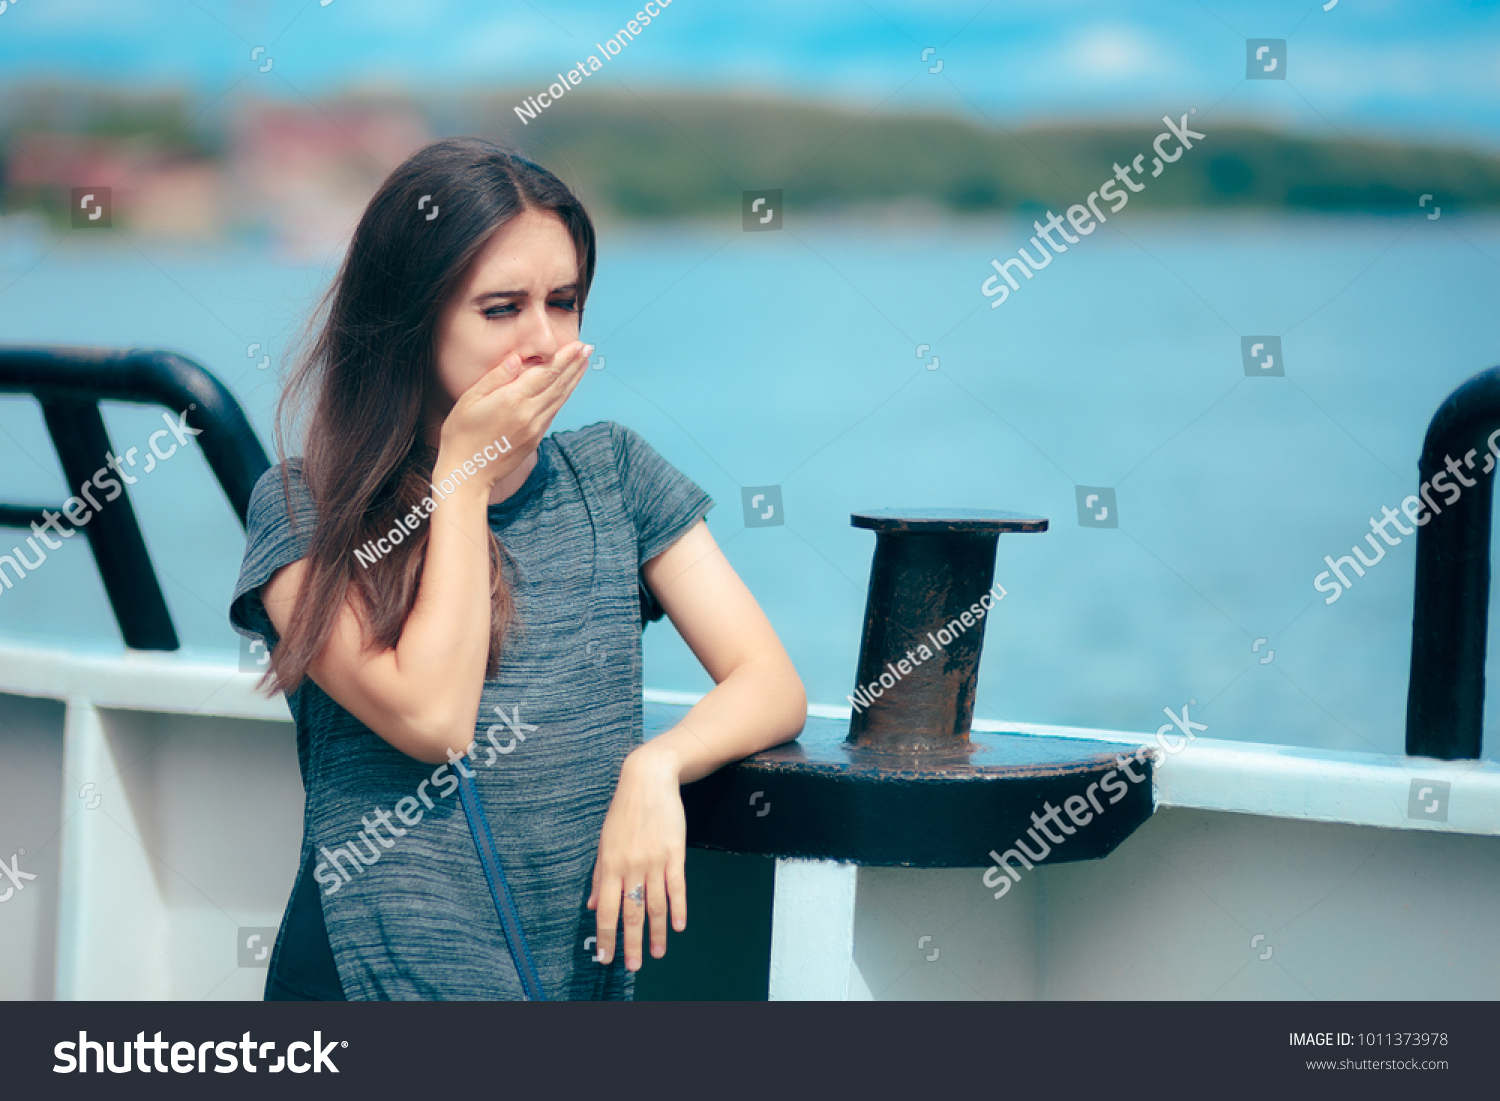 Sea sick woman suffering motion sickness while on boat. Suffering girl traveling on water and feeling fearful and unwell
 #1011373978